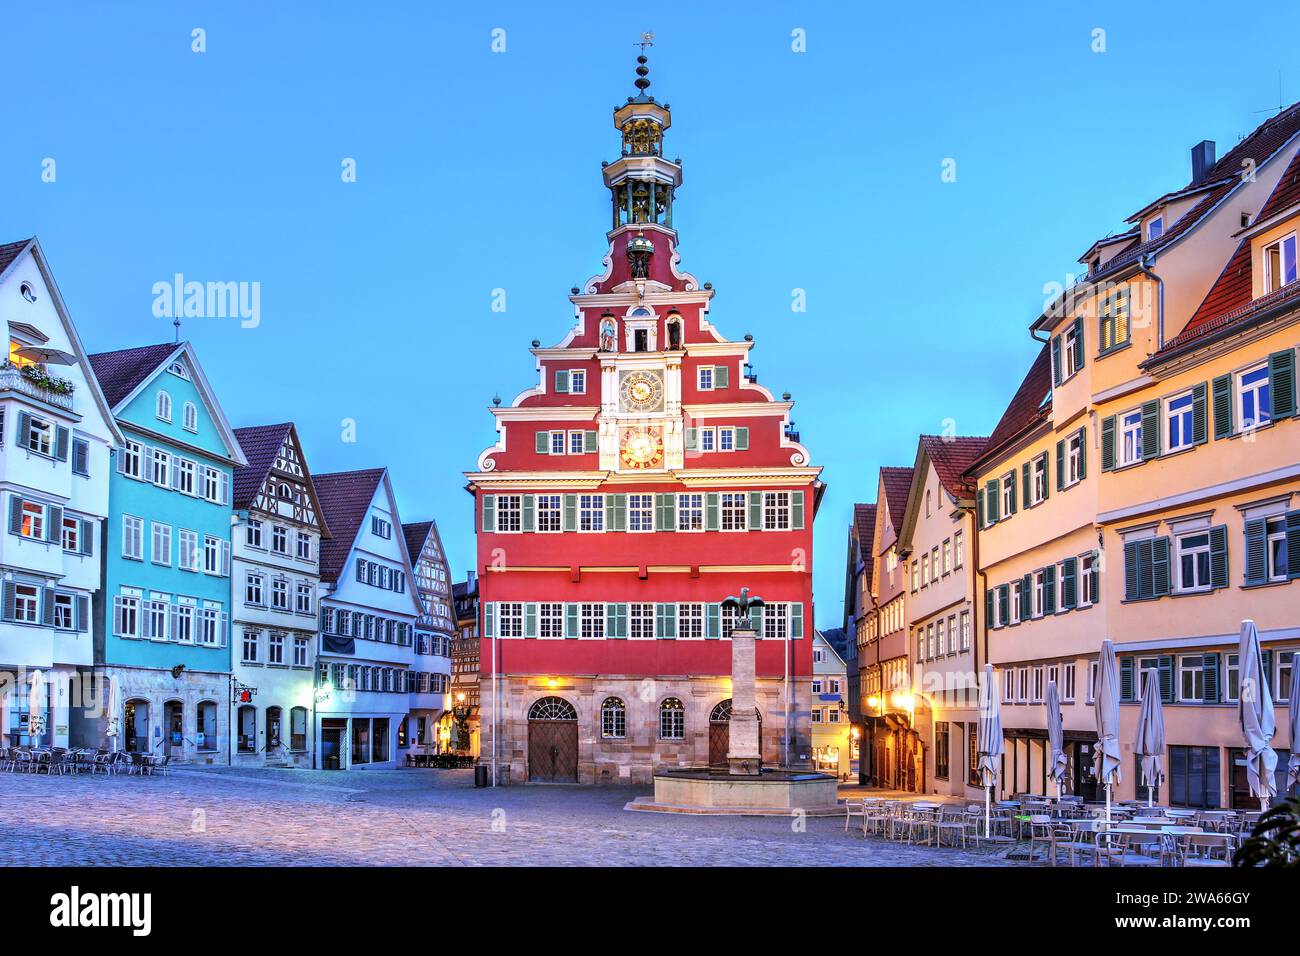 Evening scene in Esslingen am Neckar, near Stuttgart in Baden-Wurttemberg with the Old Townhall (Alte Rathaus) and other historical houses in Rathausp Stock Photo